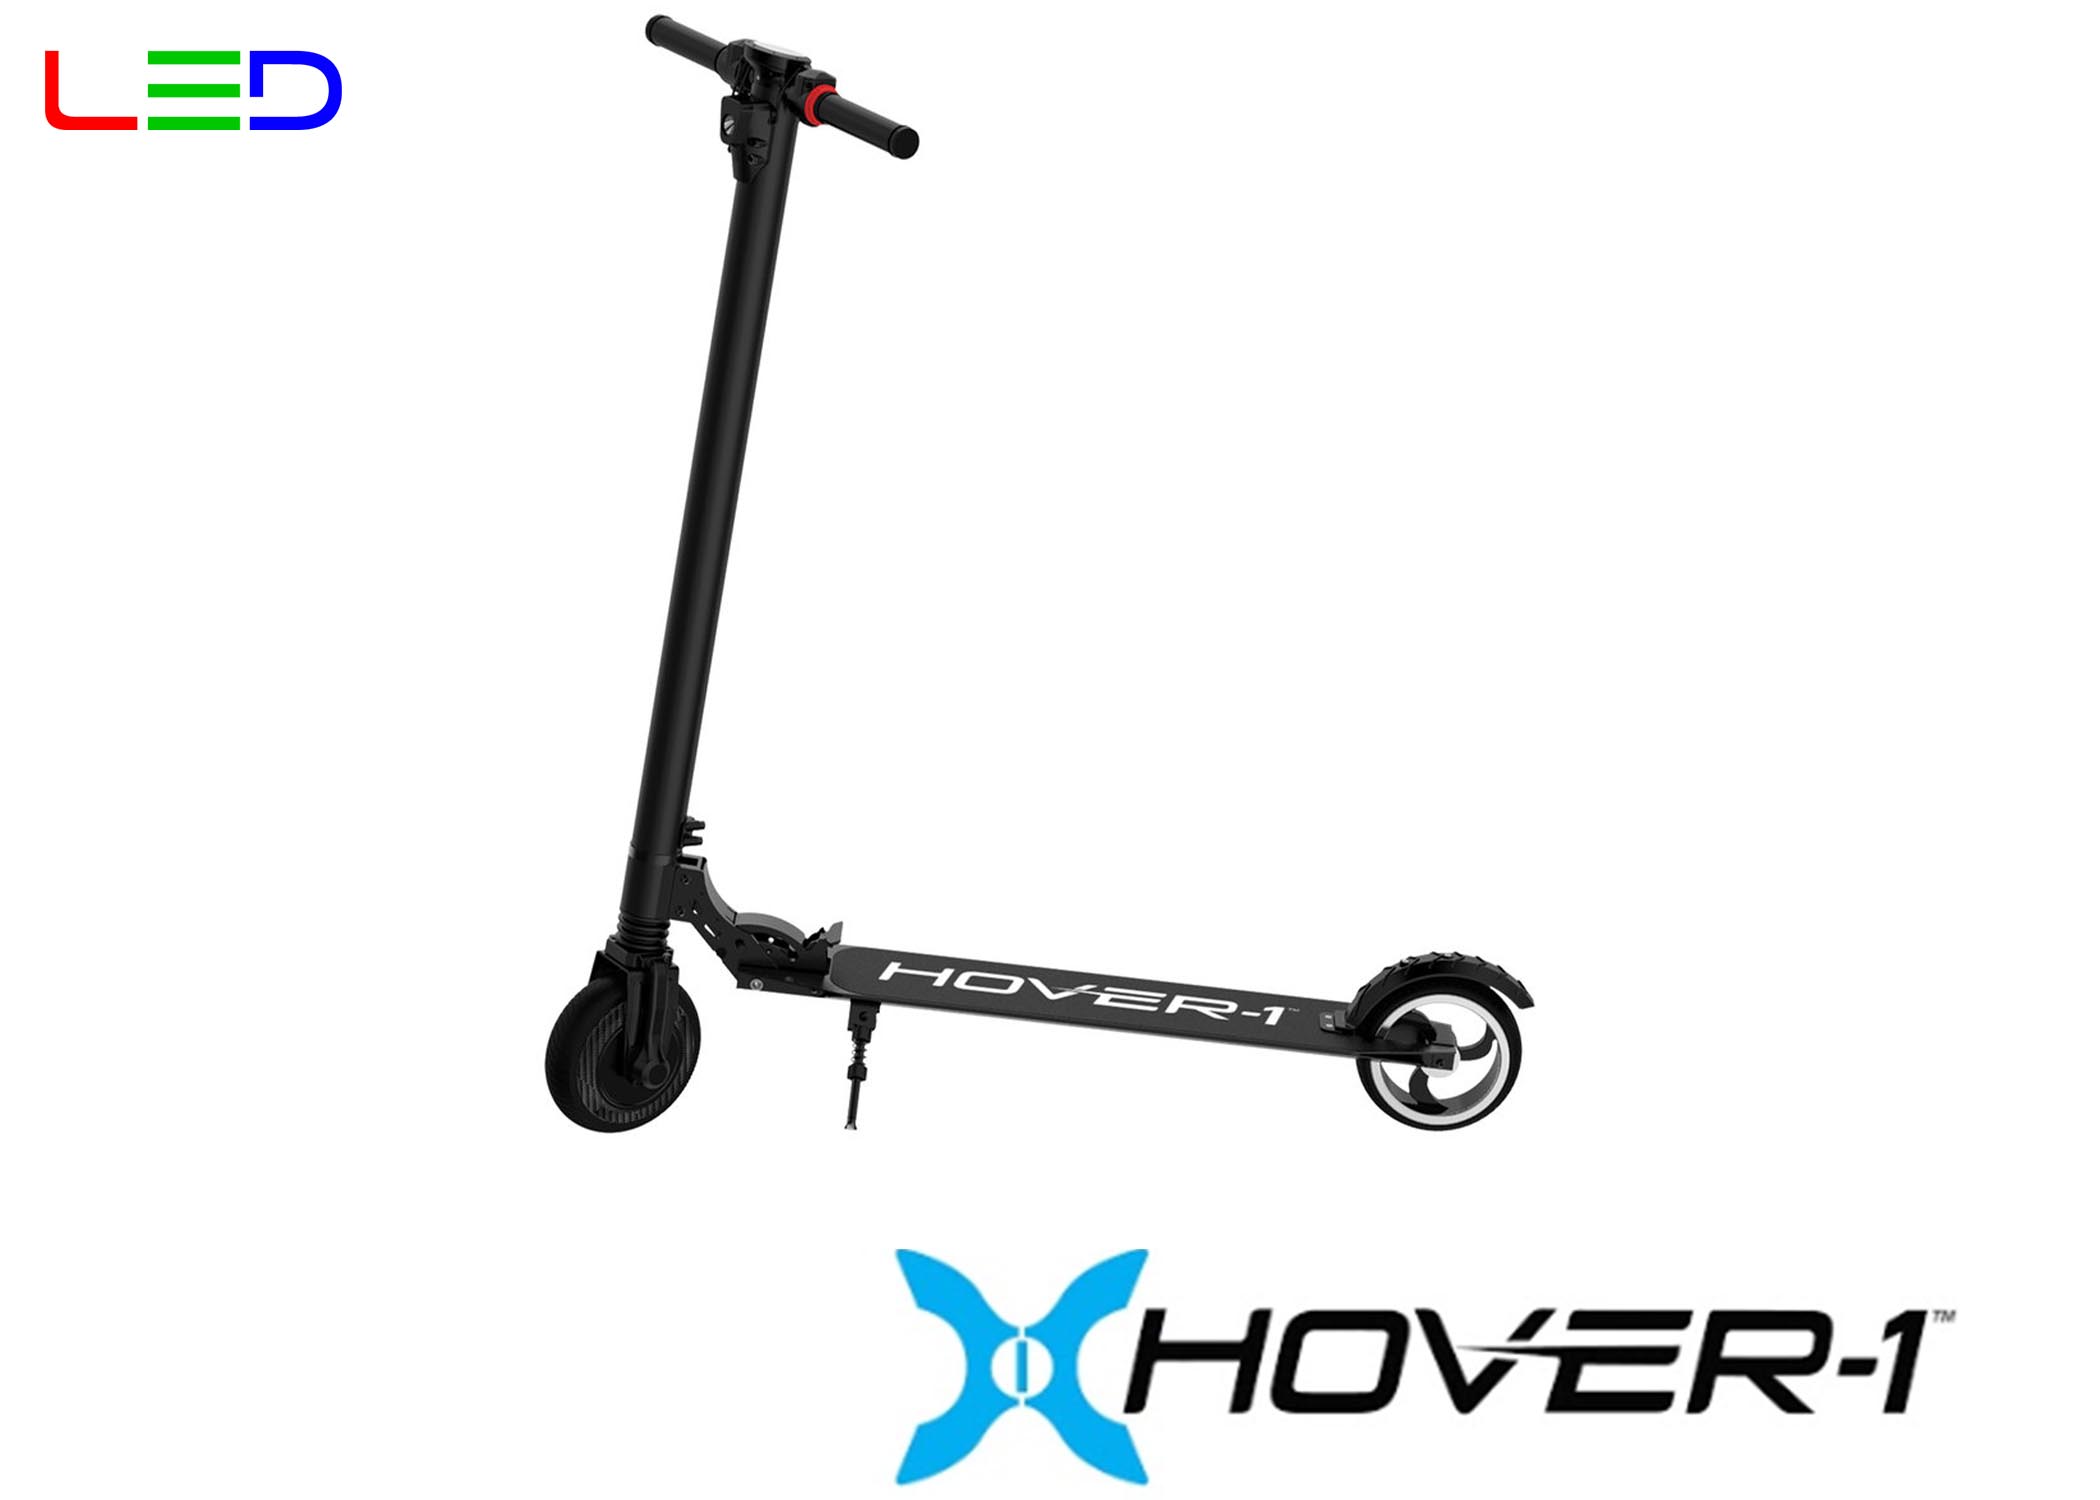 Hover-1 UL Certified Electric Powered Folding Electric Scooter, UL 2272 Certified - image 1 of 3